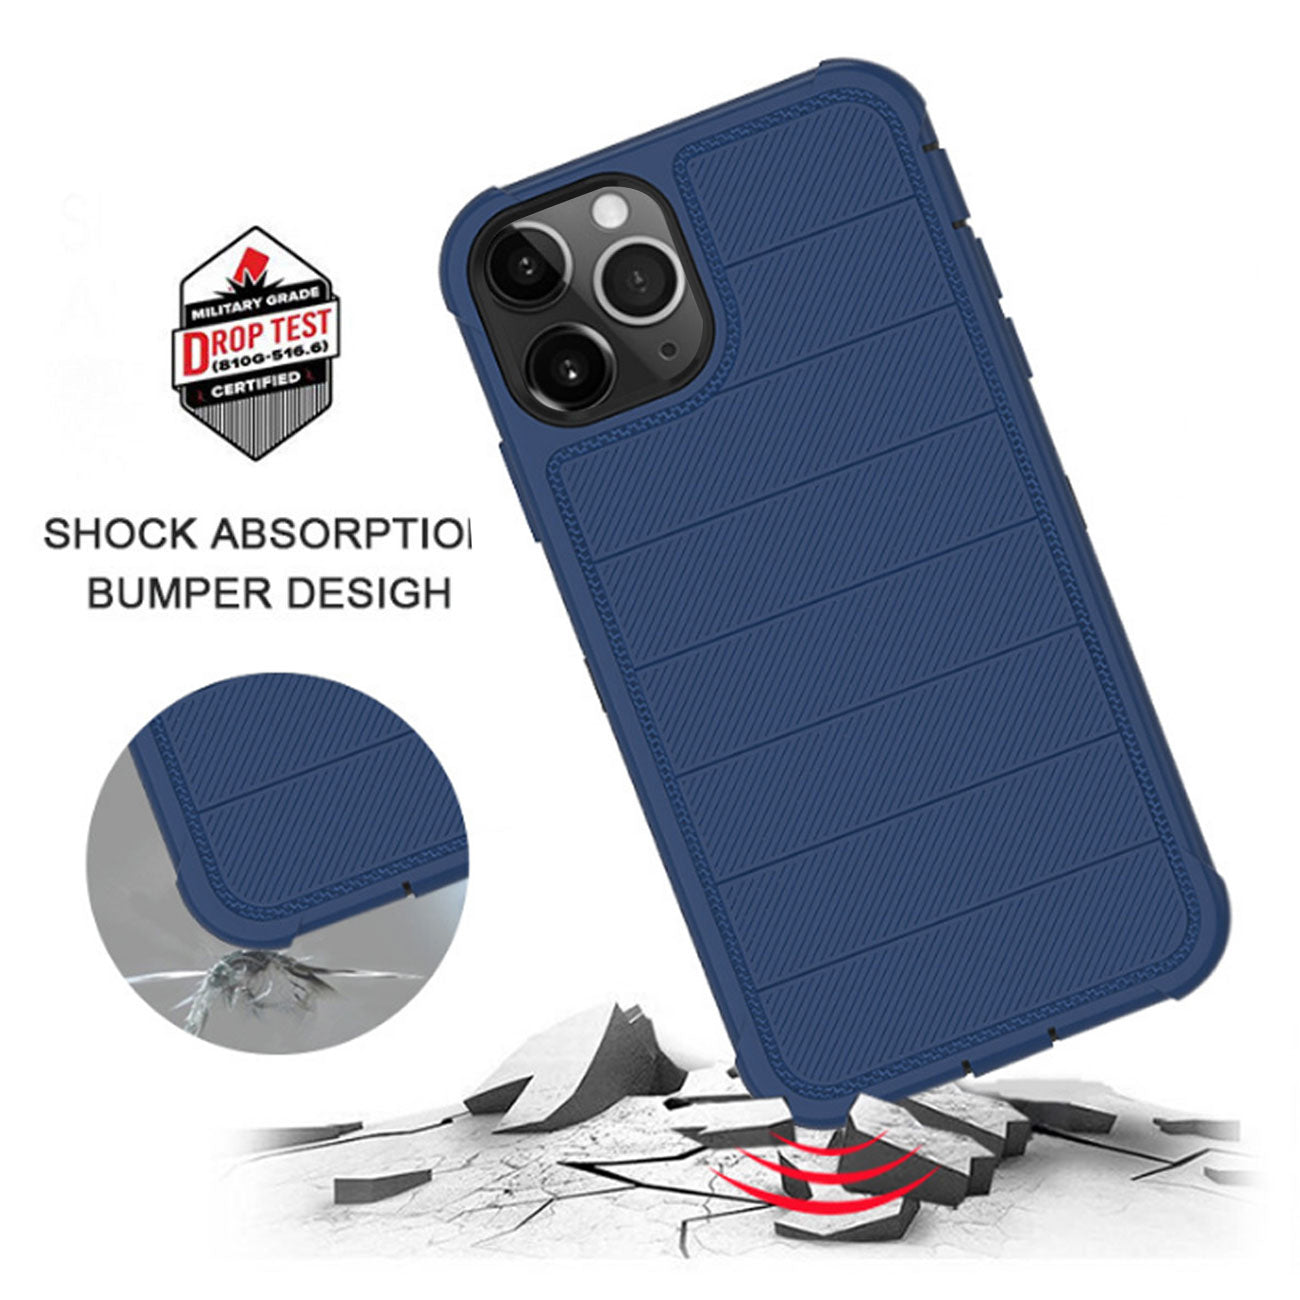 3-In-1 Hybrid Heavy Duty Holster Combo Case For APPLE IPHONE 11 PRO In Navy